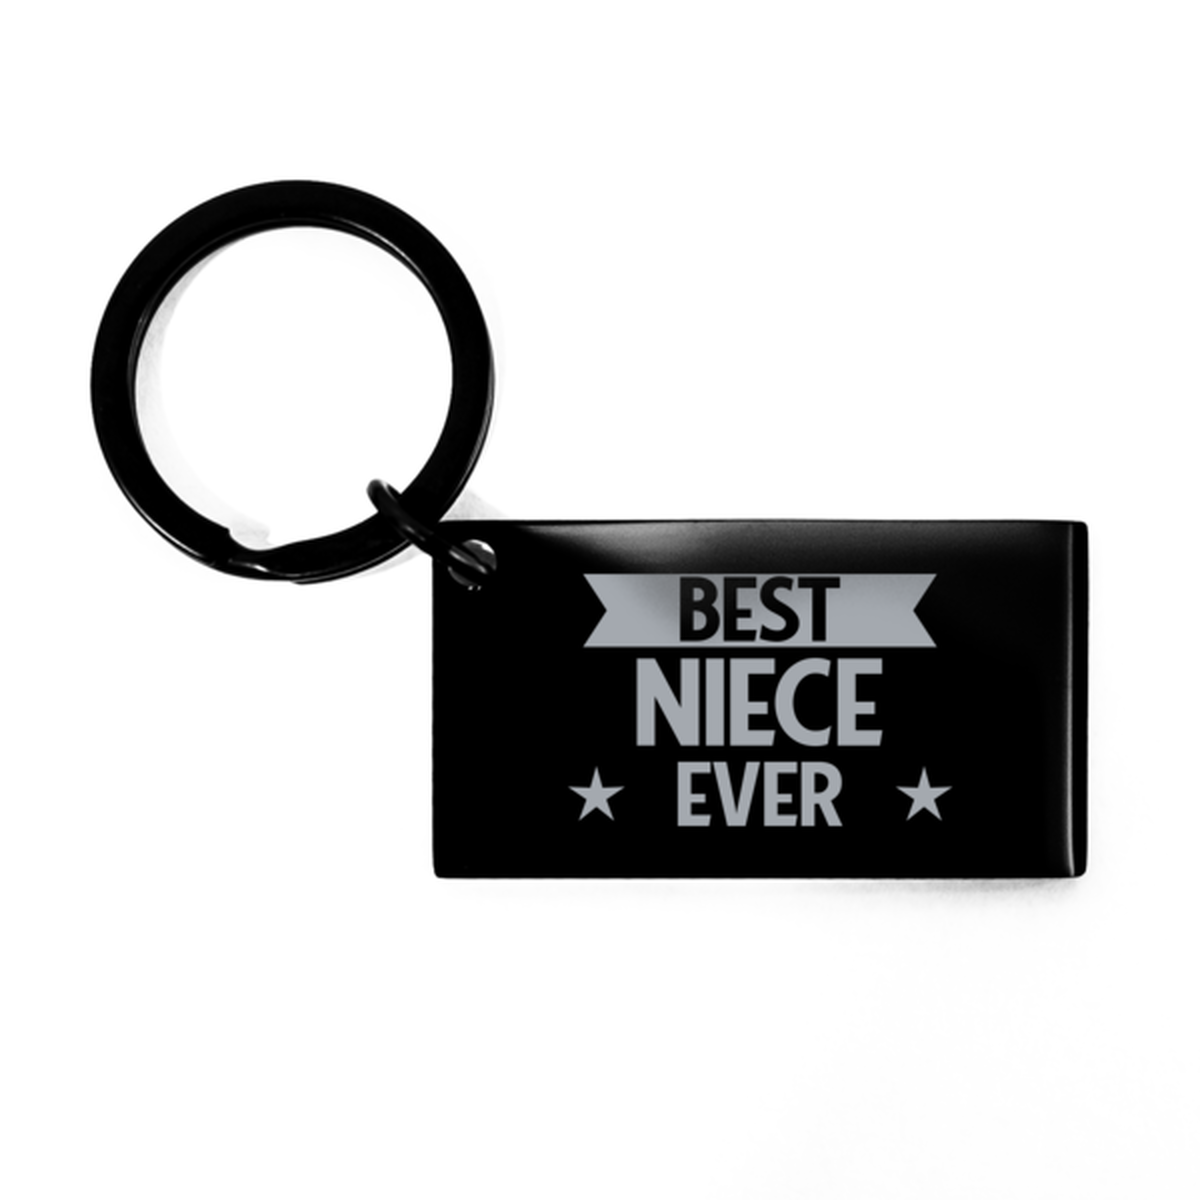 Best Niece Ever Niece Gifts, Funny Black Keychain For Niece, Birthday Engraved Keyring Presents For Women